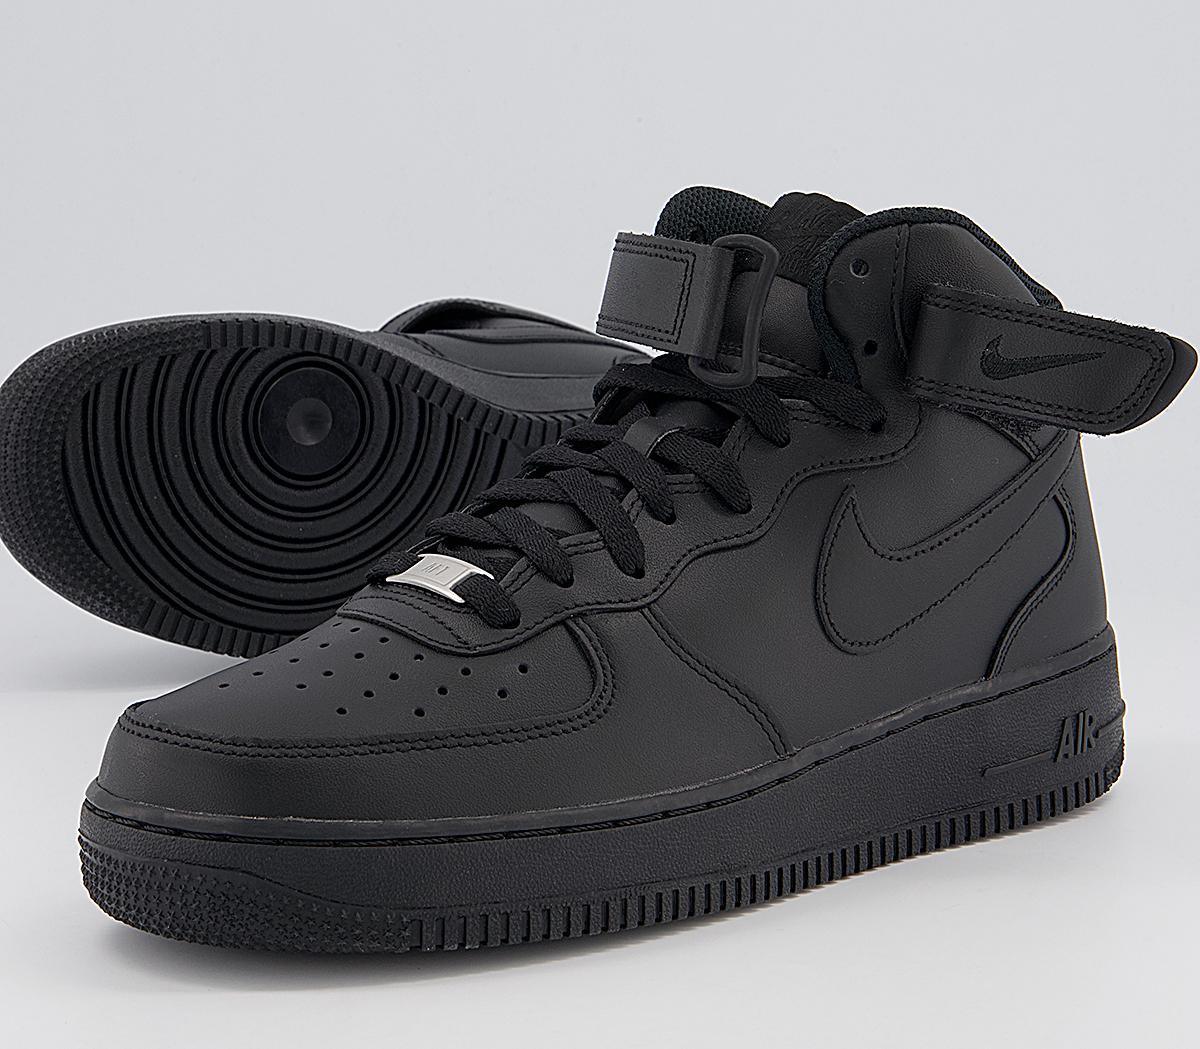 Nike Air Force 1 Mid Trainers Black - Unisex Sports